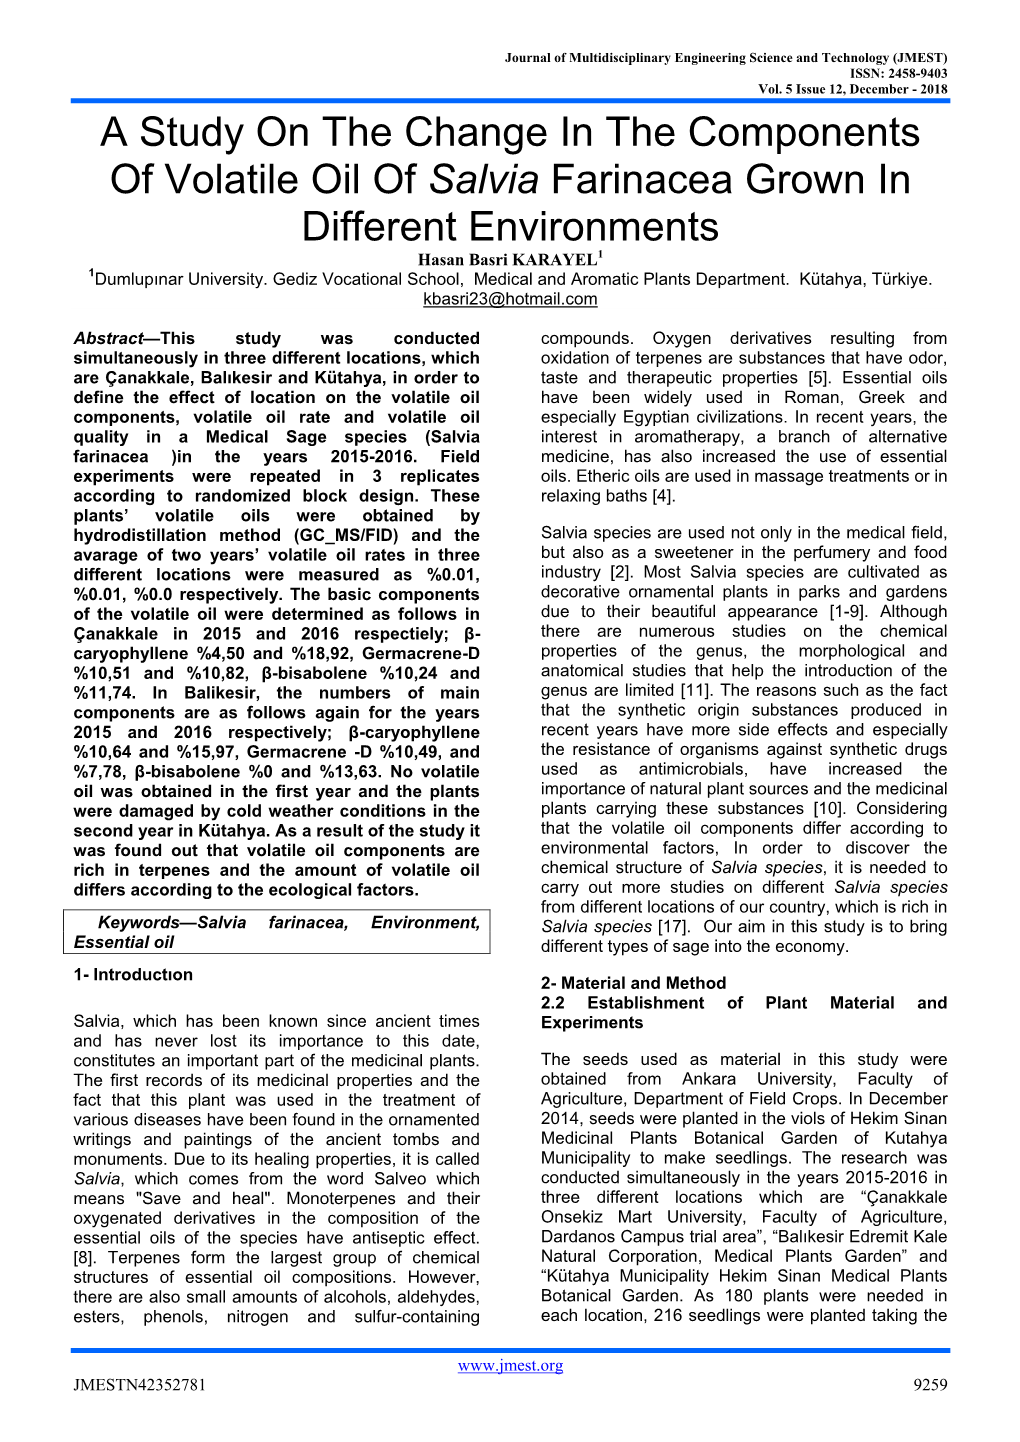 A Study on the Change in the Components of Volatile Oil of Salvia Farinacea Grown in Different Environments Hasan Basri KARAYEL1 1Dumlupınar University